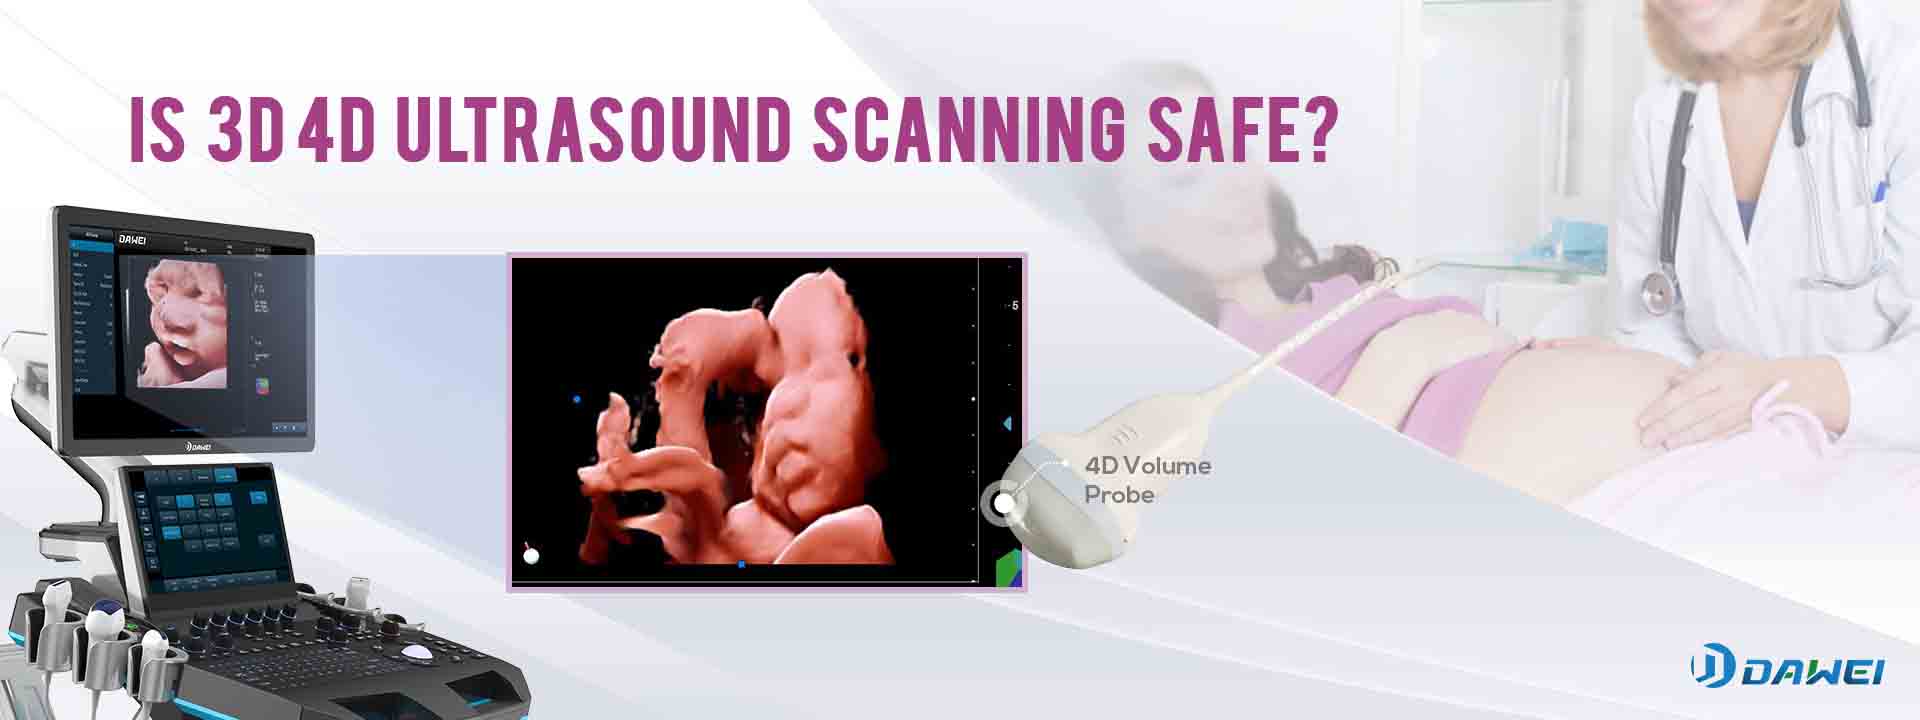 3D/4D ultrasound scanning uses the same ultrasound to build a better image through software-enhanced imaging.